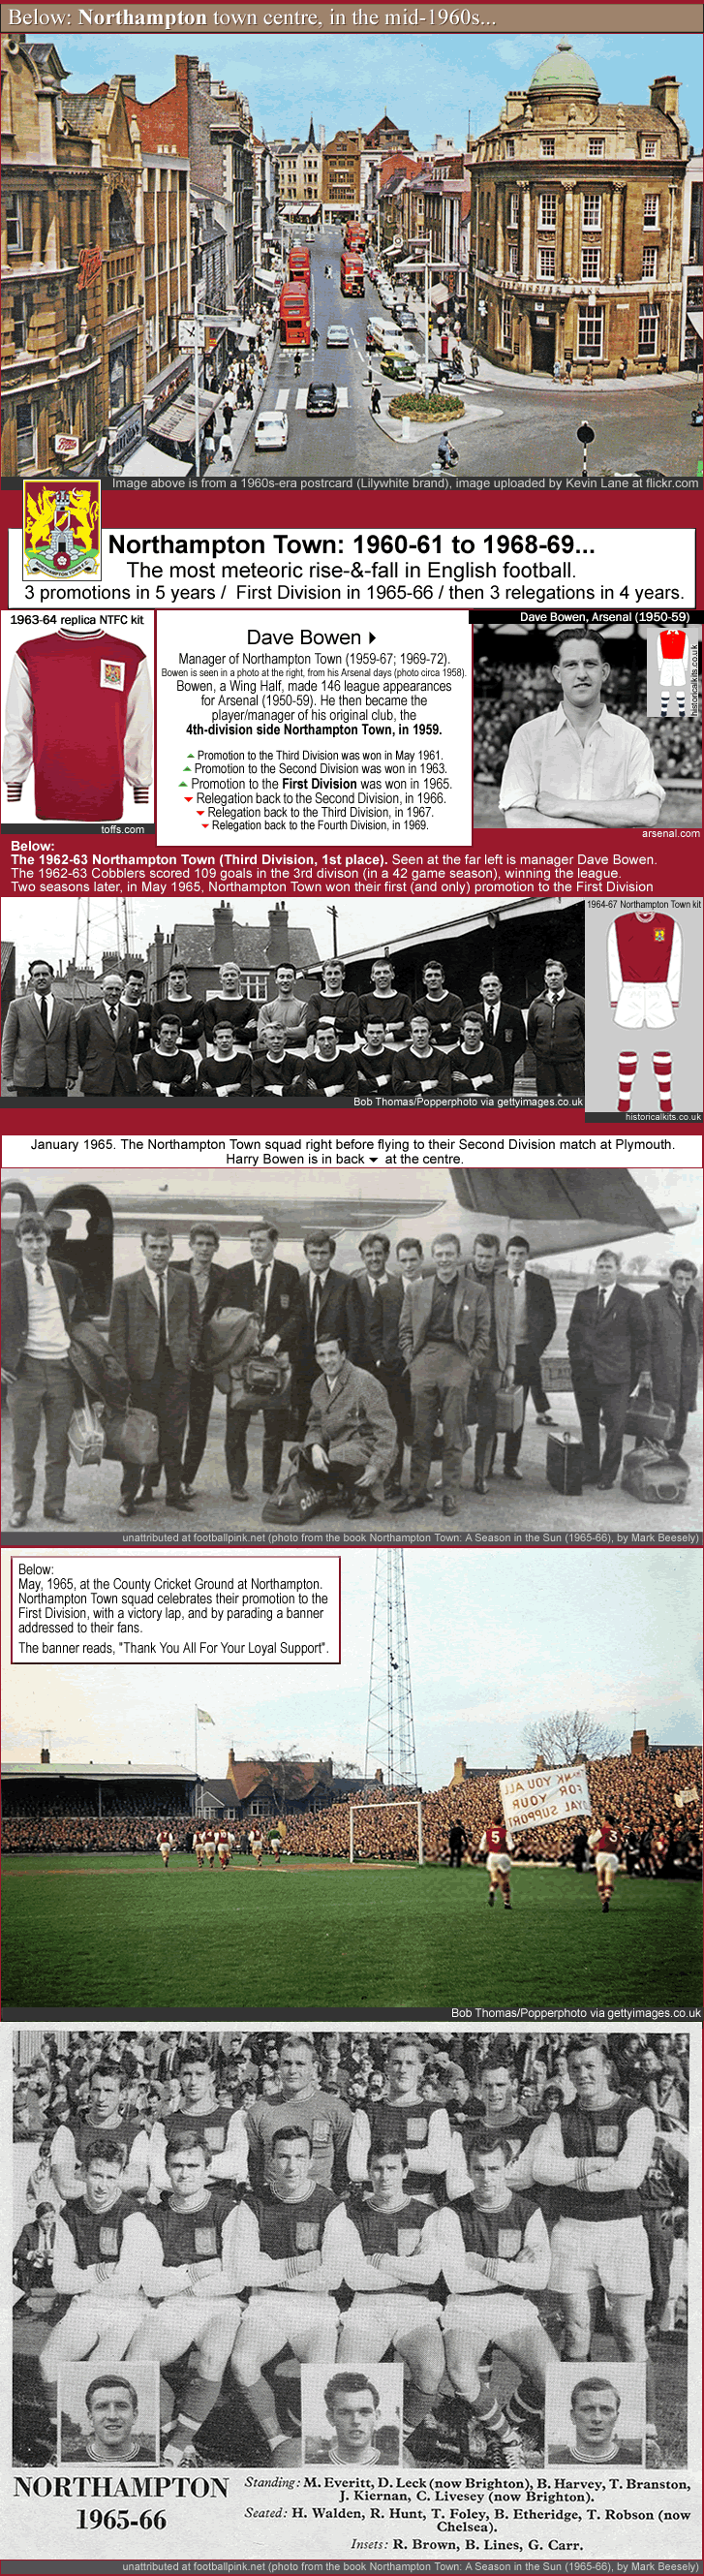 northampton-town_1960s_3-promotions_1965-66_1st-div_3-relegations_dave-bowen_i_.gif